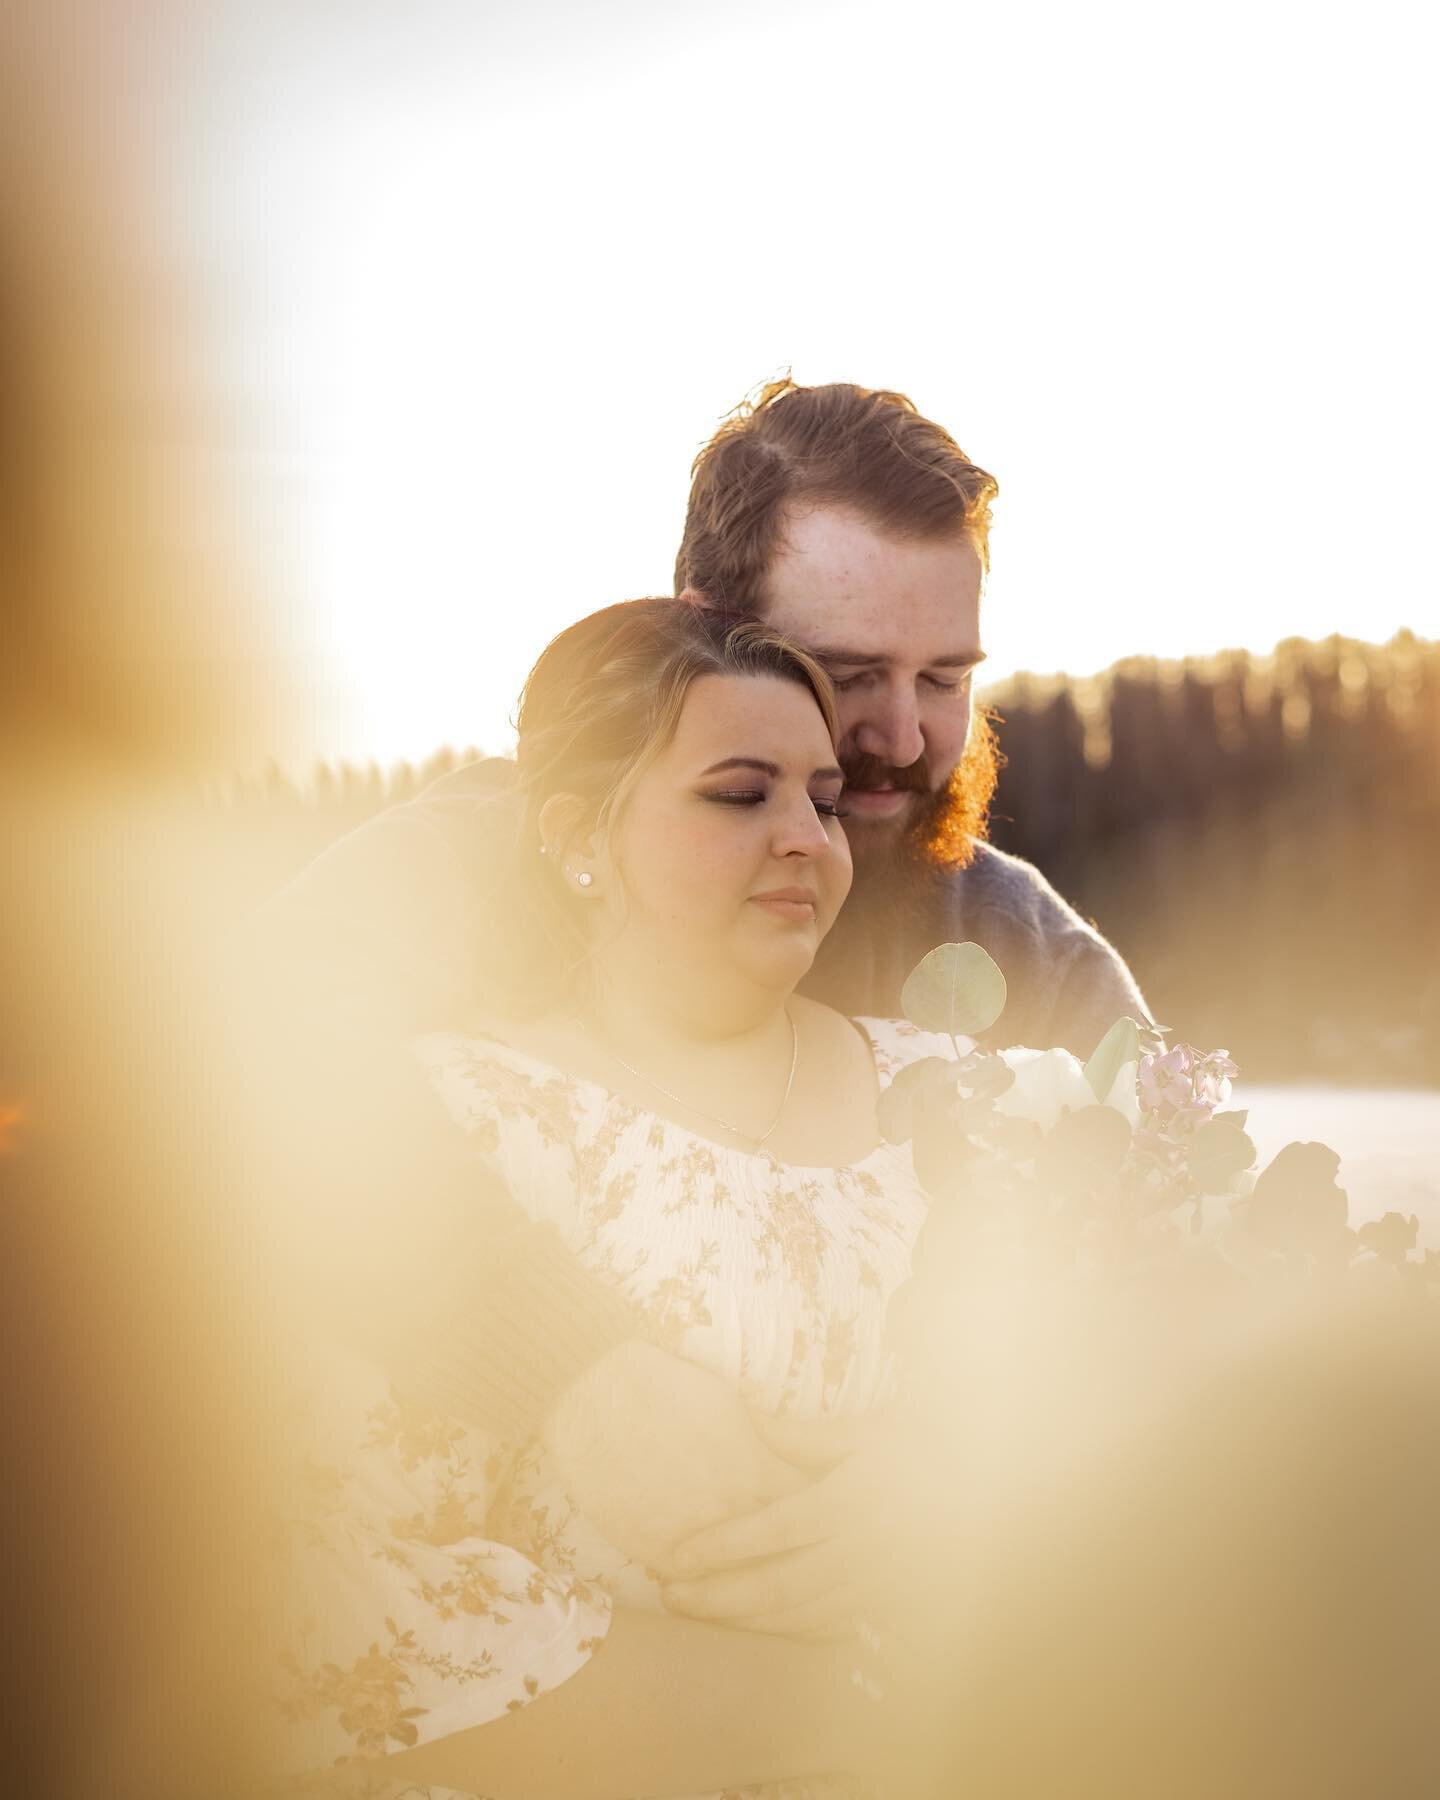 Magic in the mountains&hellip;. 

Just two very quick sneak peeks from our giveaway winners session with Serena and Alex in Jasper this week! 

We had such a beautiful evening with +11 degrees out! I can&rsquo;t wait to share more after these two get